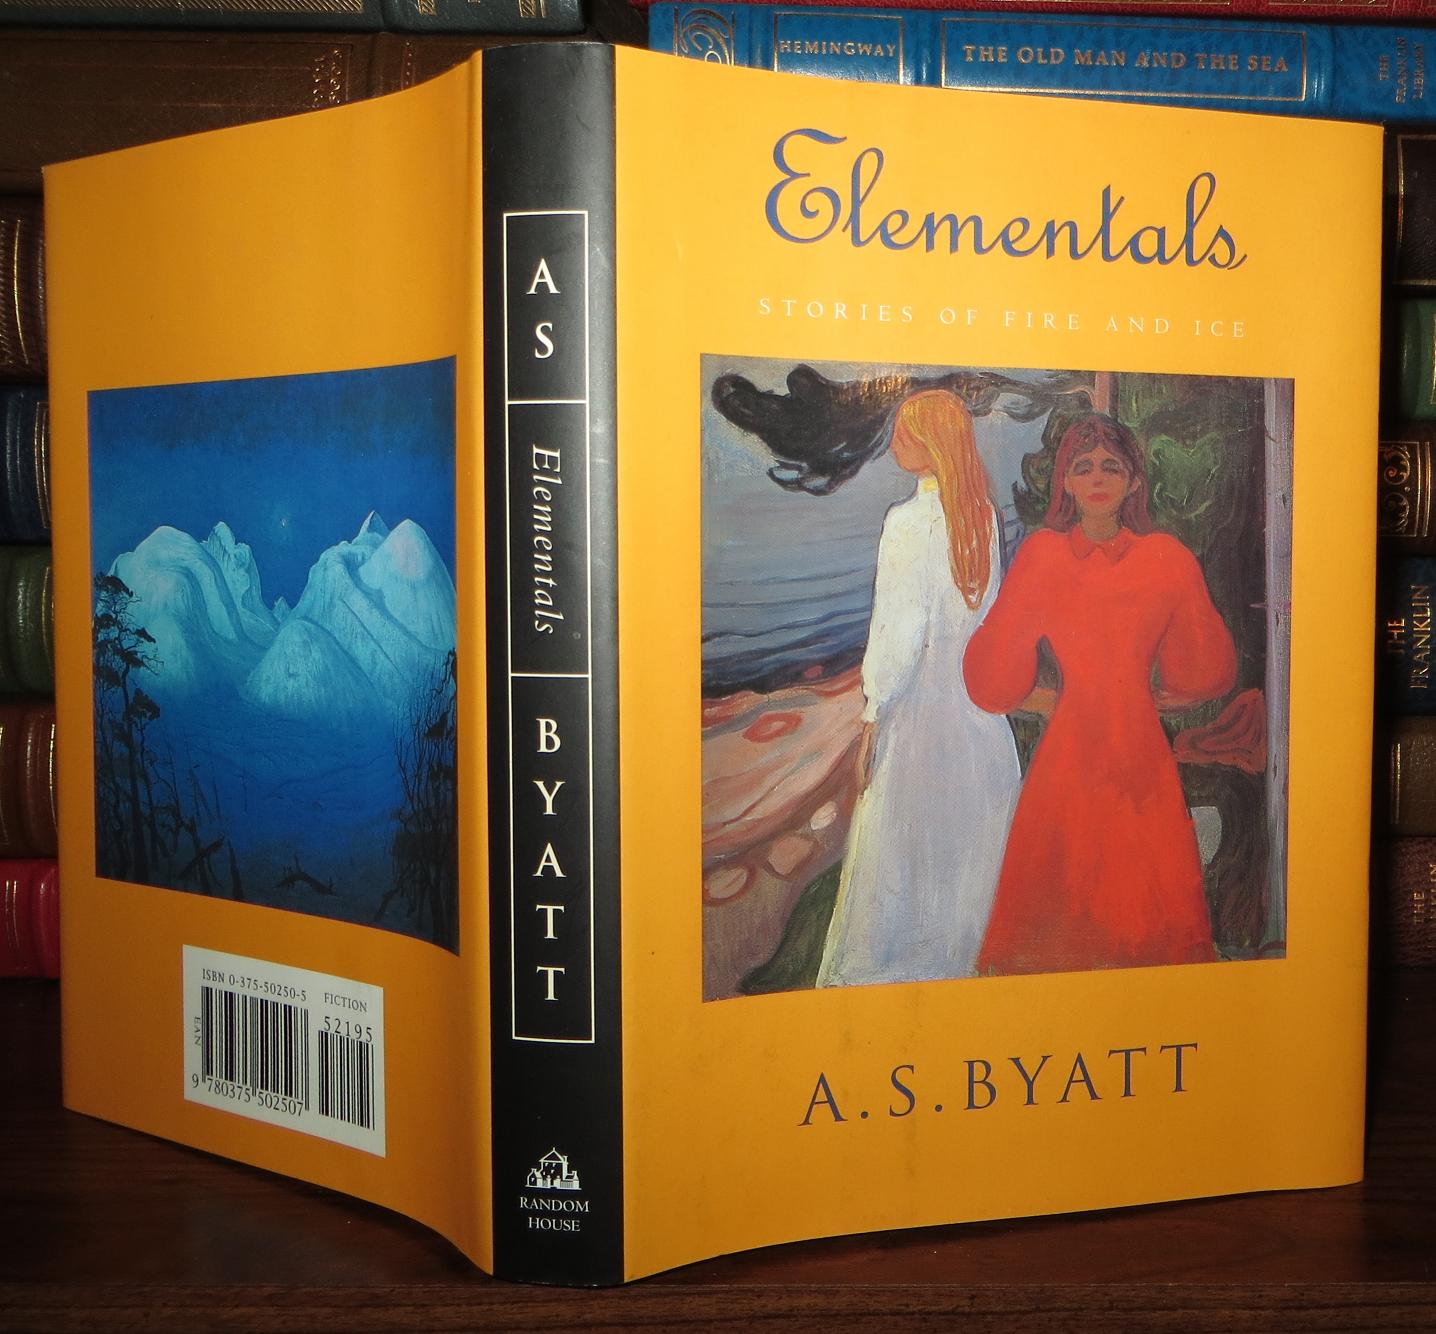 Printing　Byatt　First　Edition;　of　ELEMENTALS　Ice　and　S.　Stories　First　Fire　A.